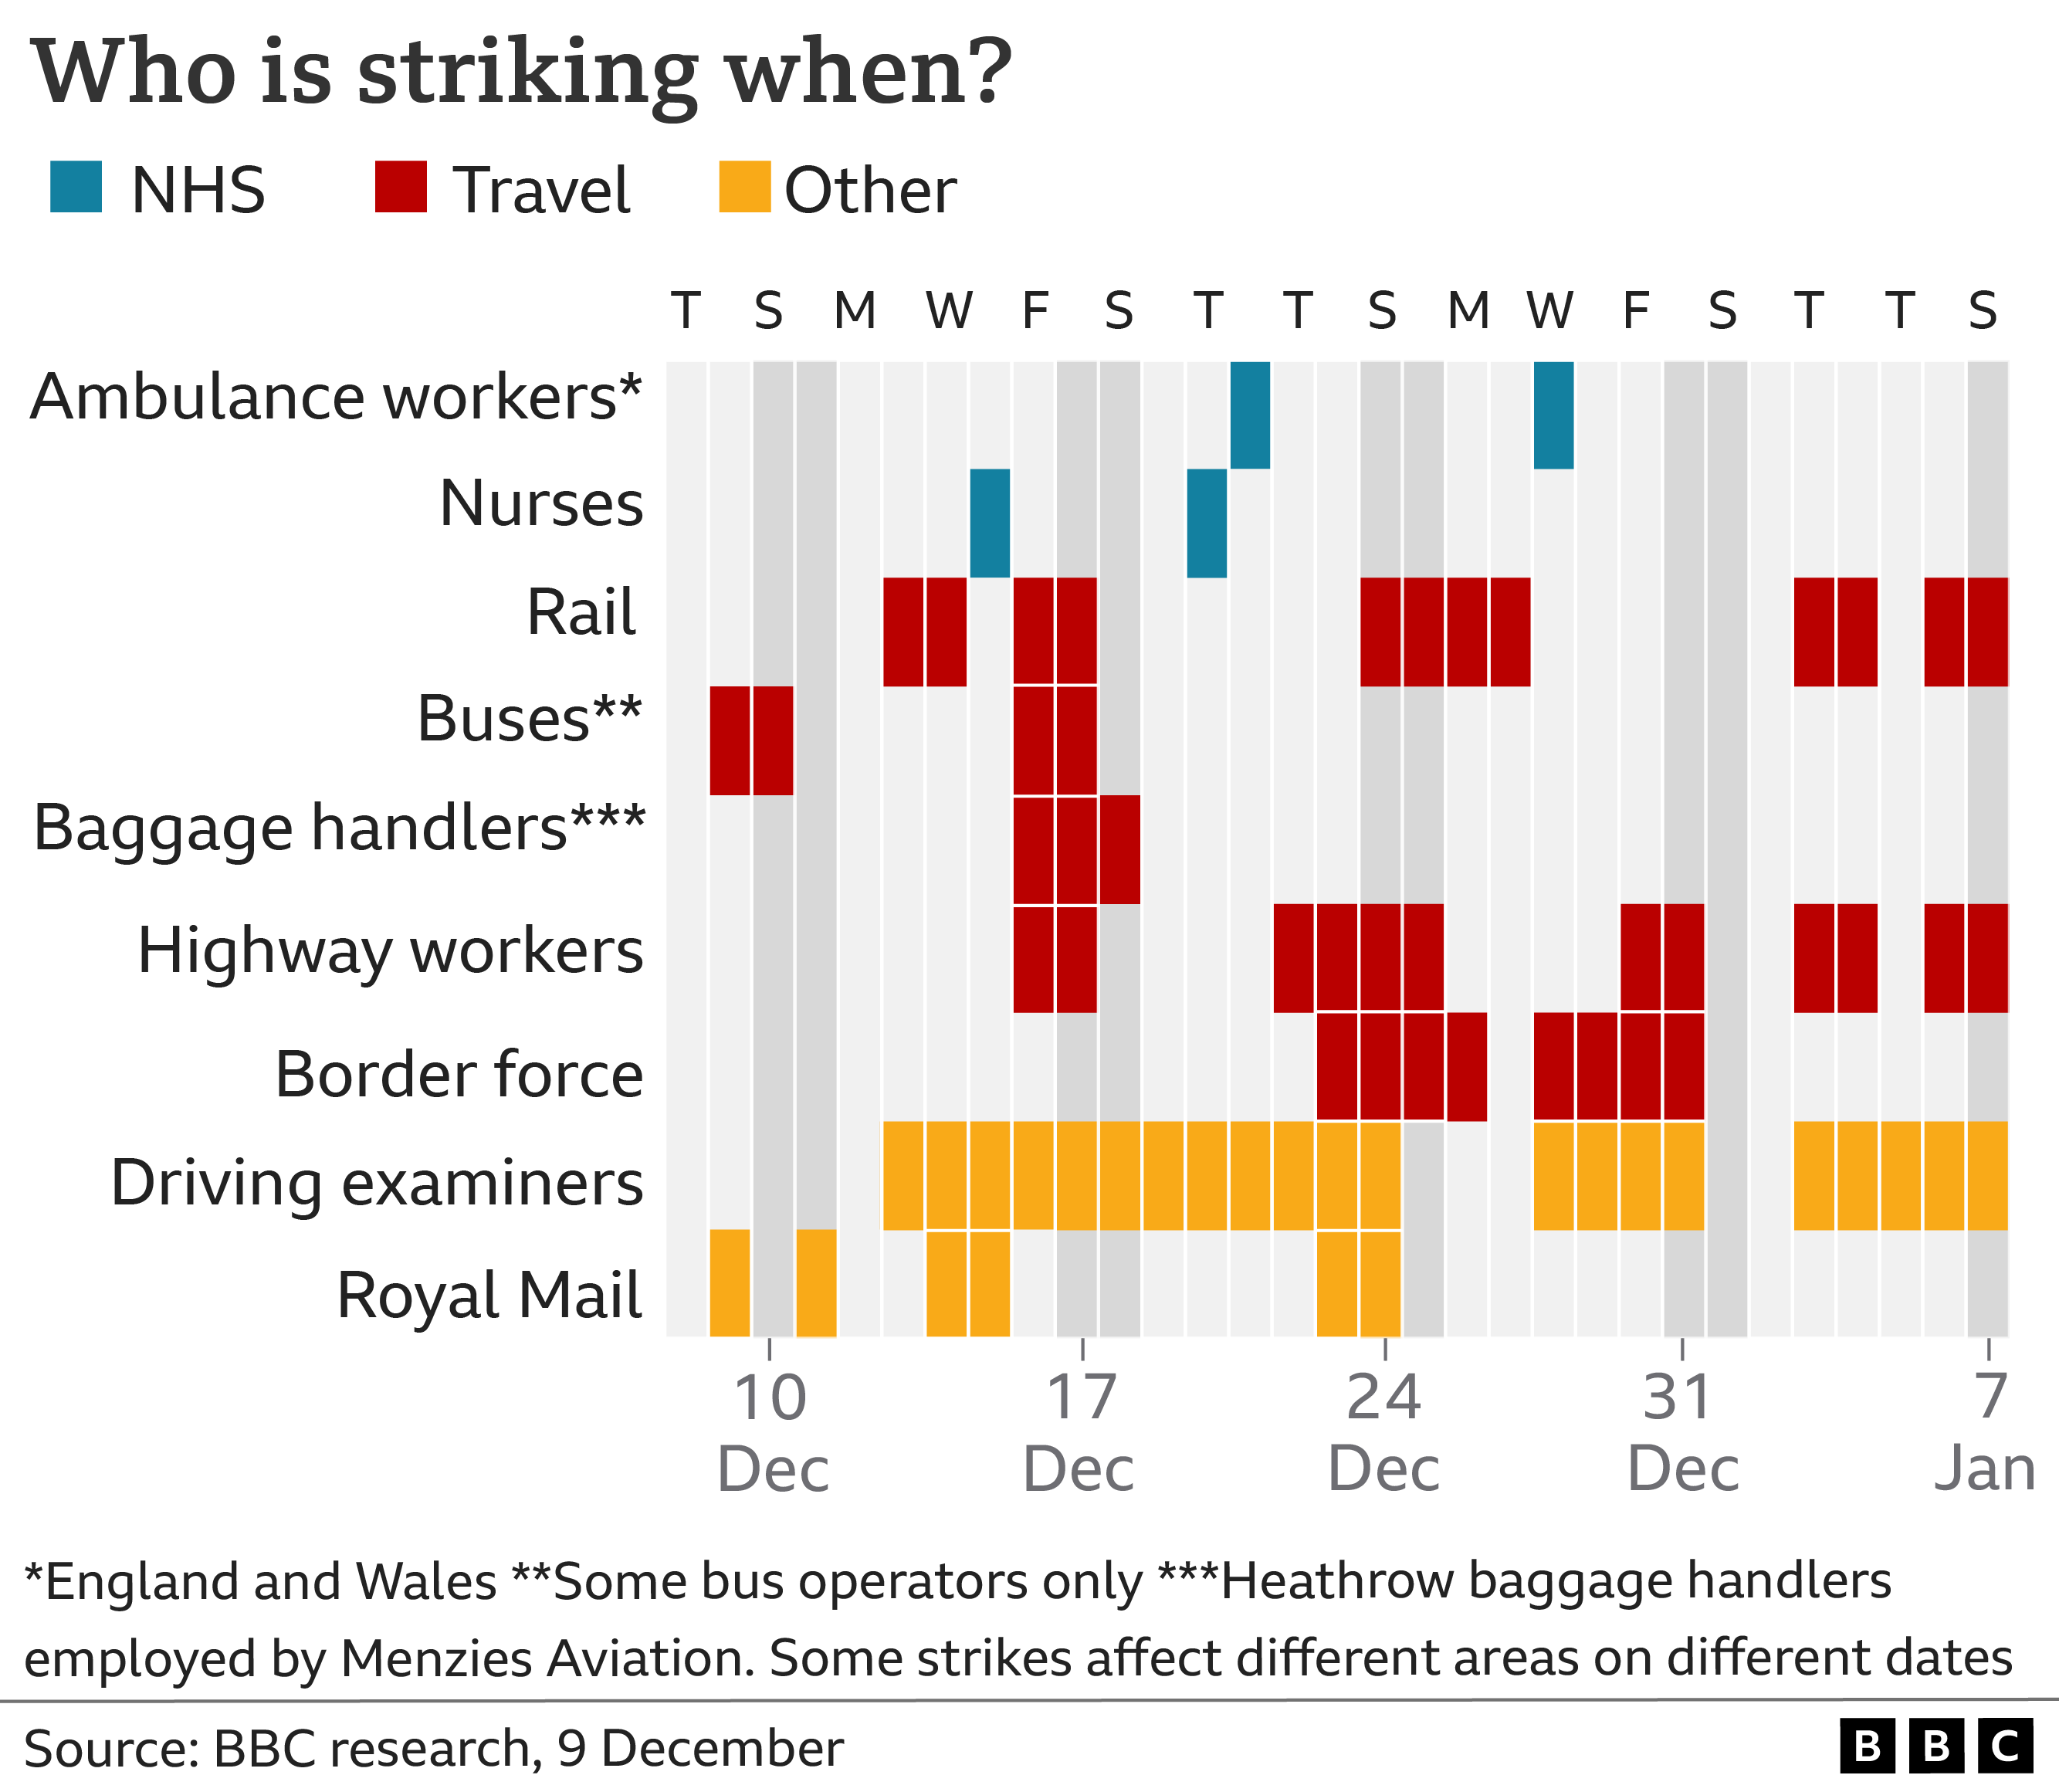 Graphic showing who is striking when (9 Dec)